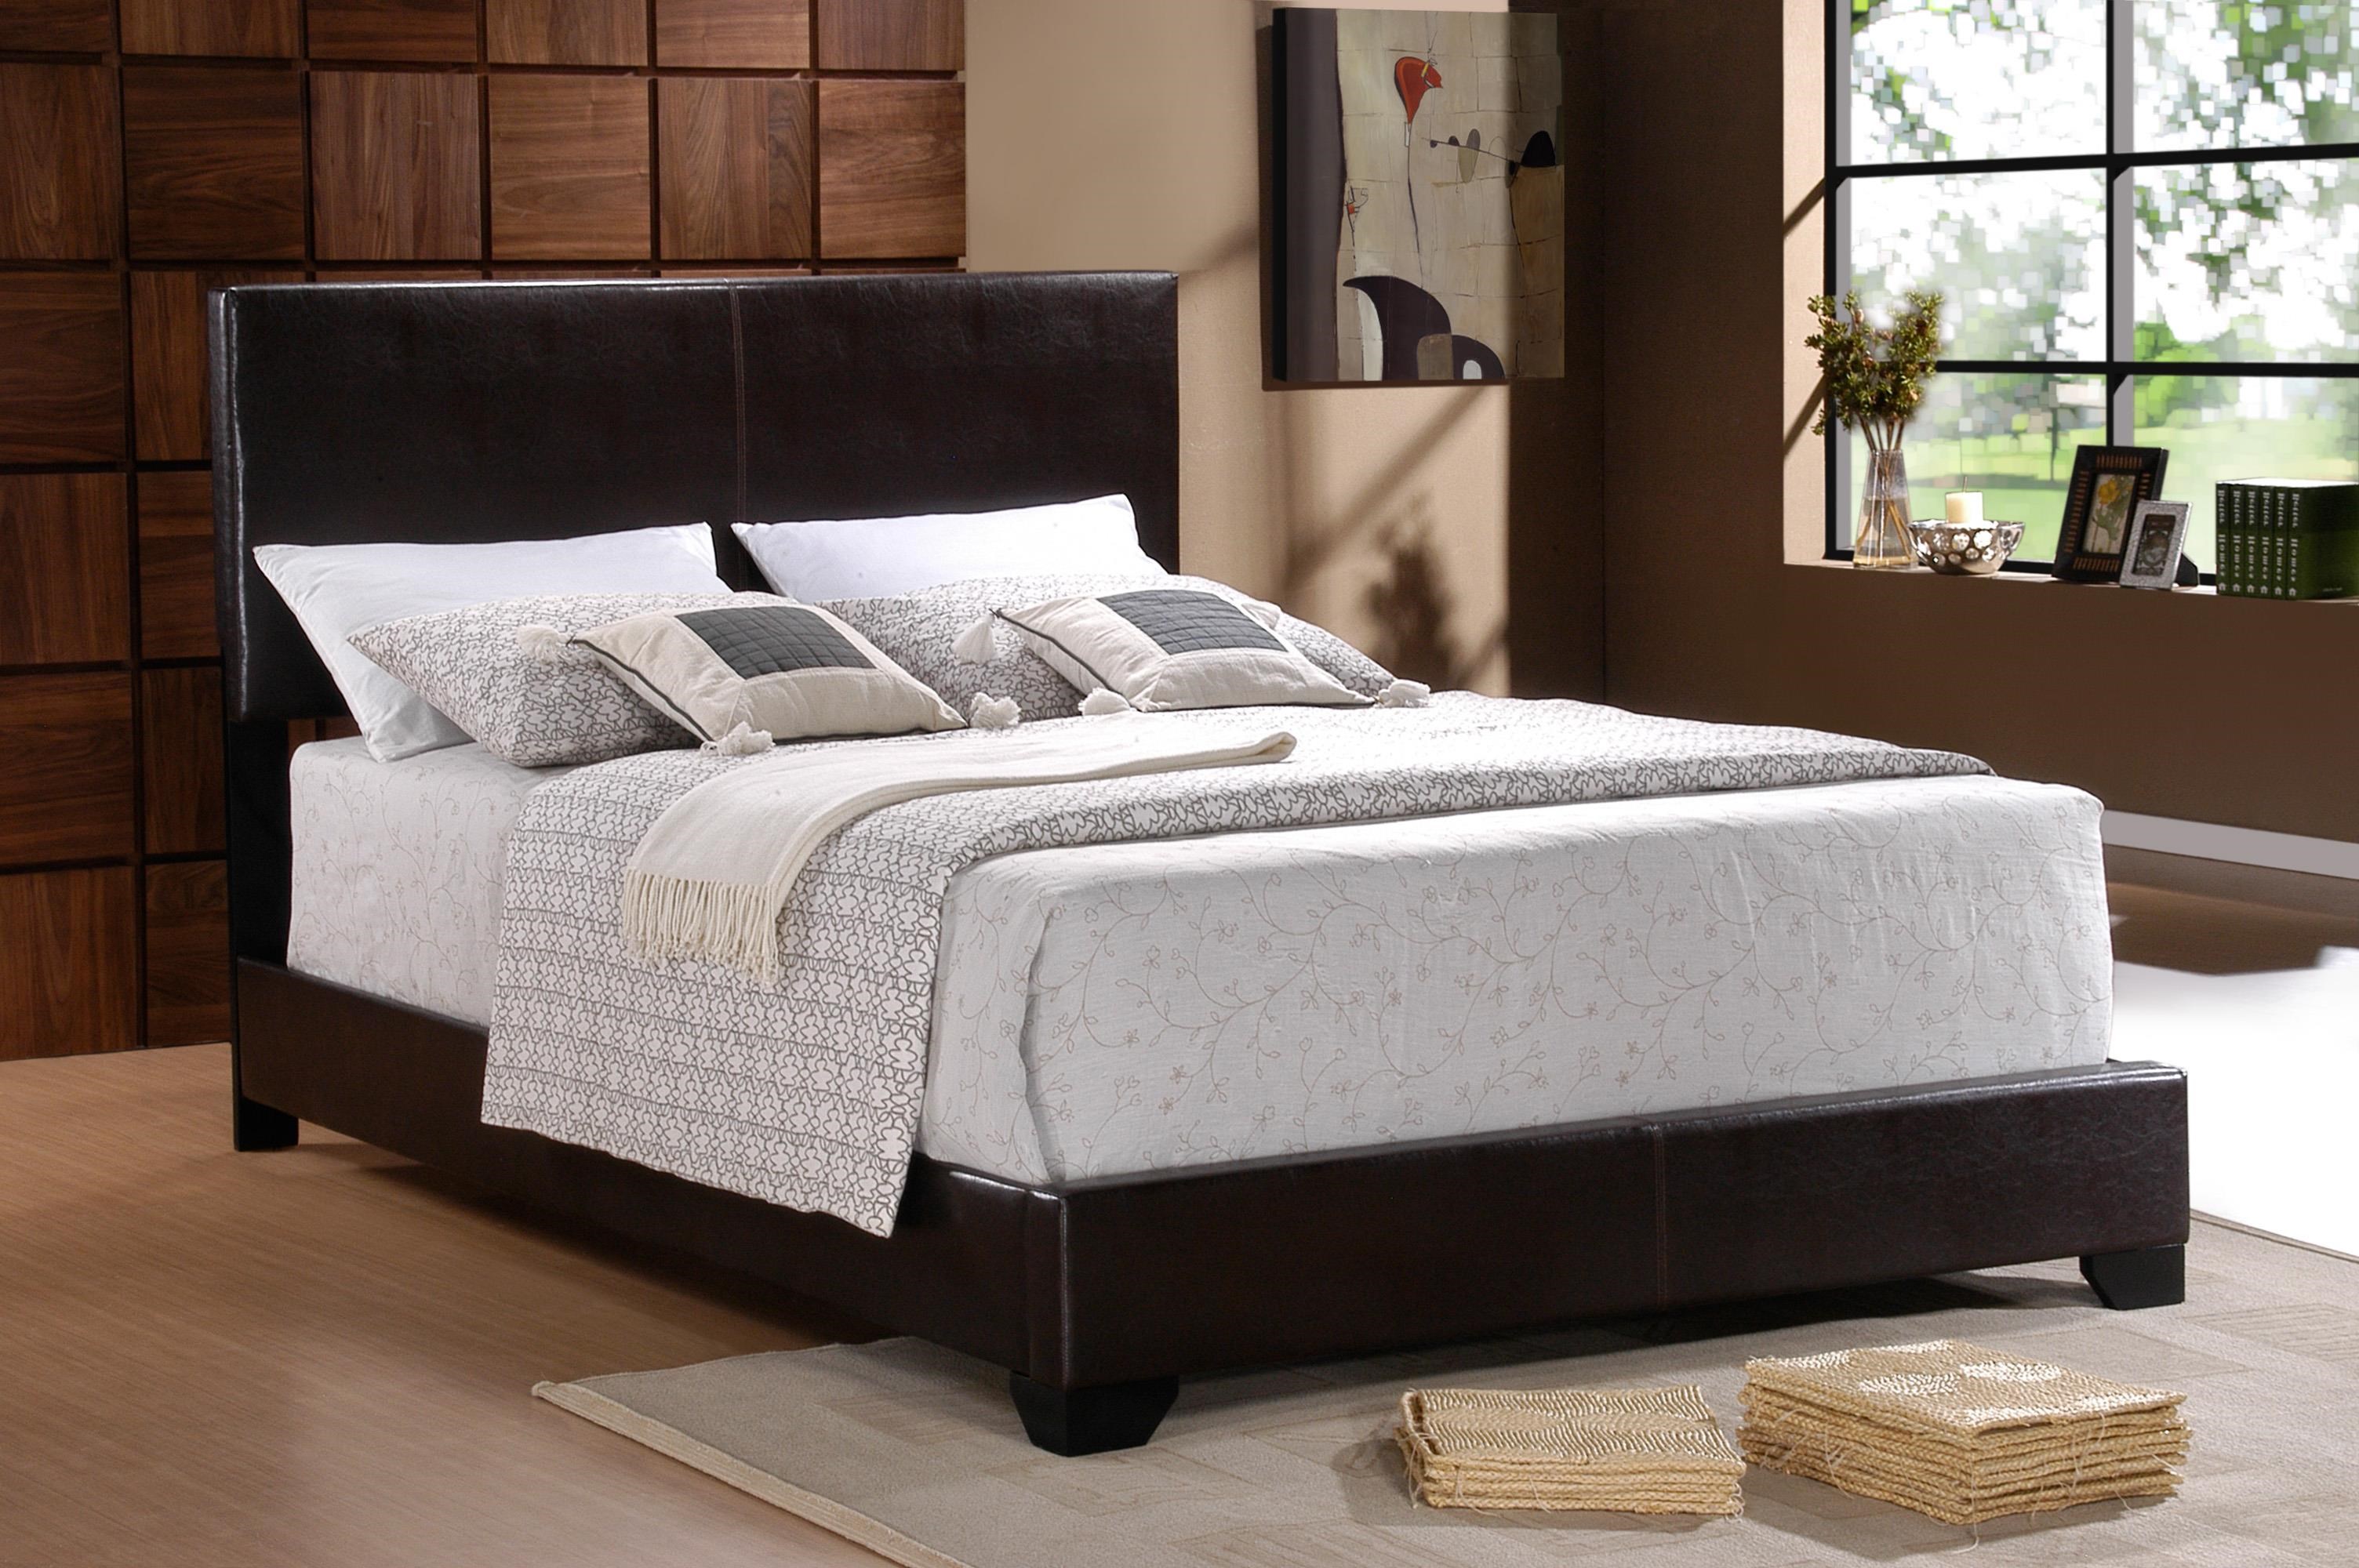 5271 ERIN Faux Grey Leather Completed Bed Twin/Full/Queen Size 